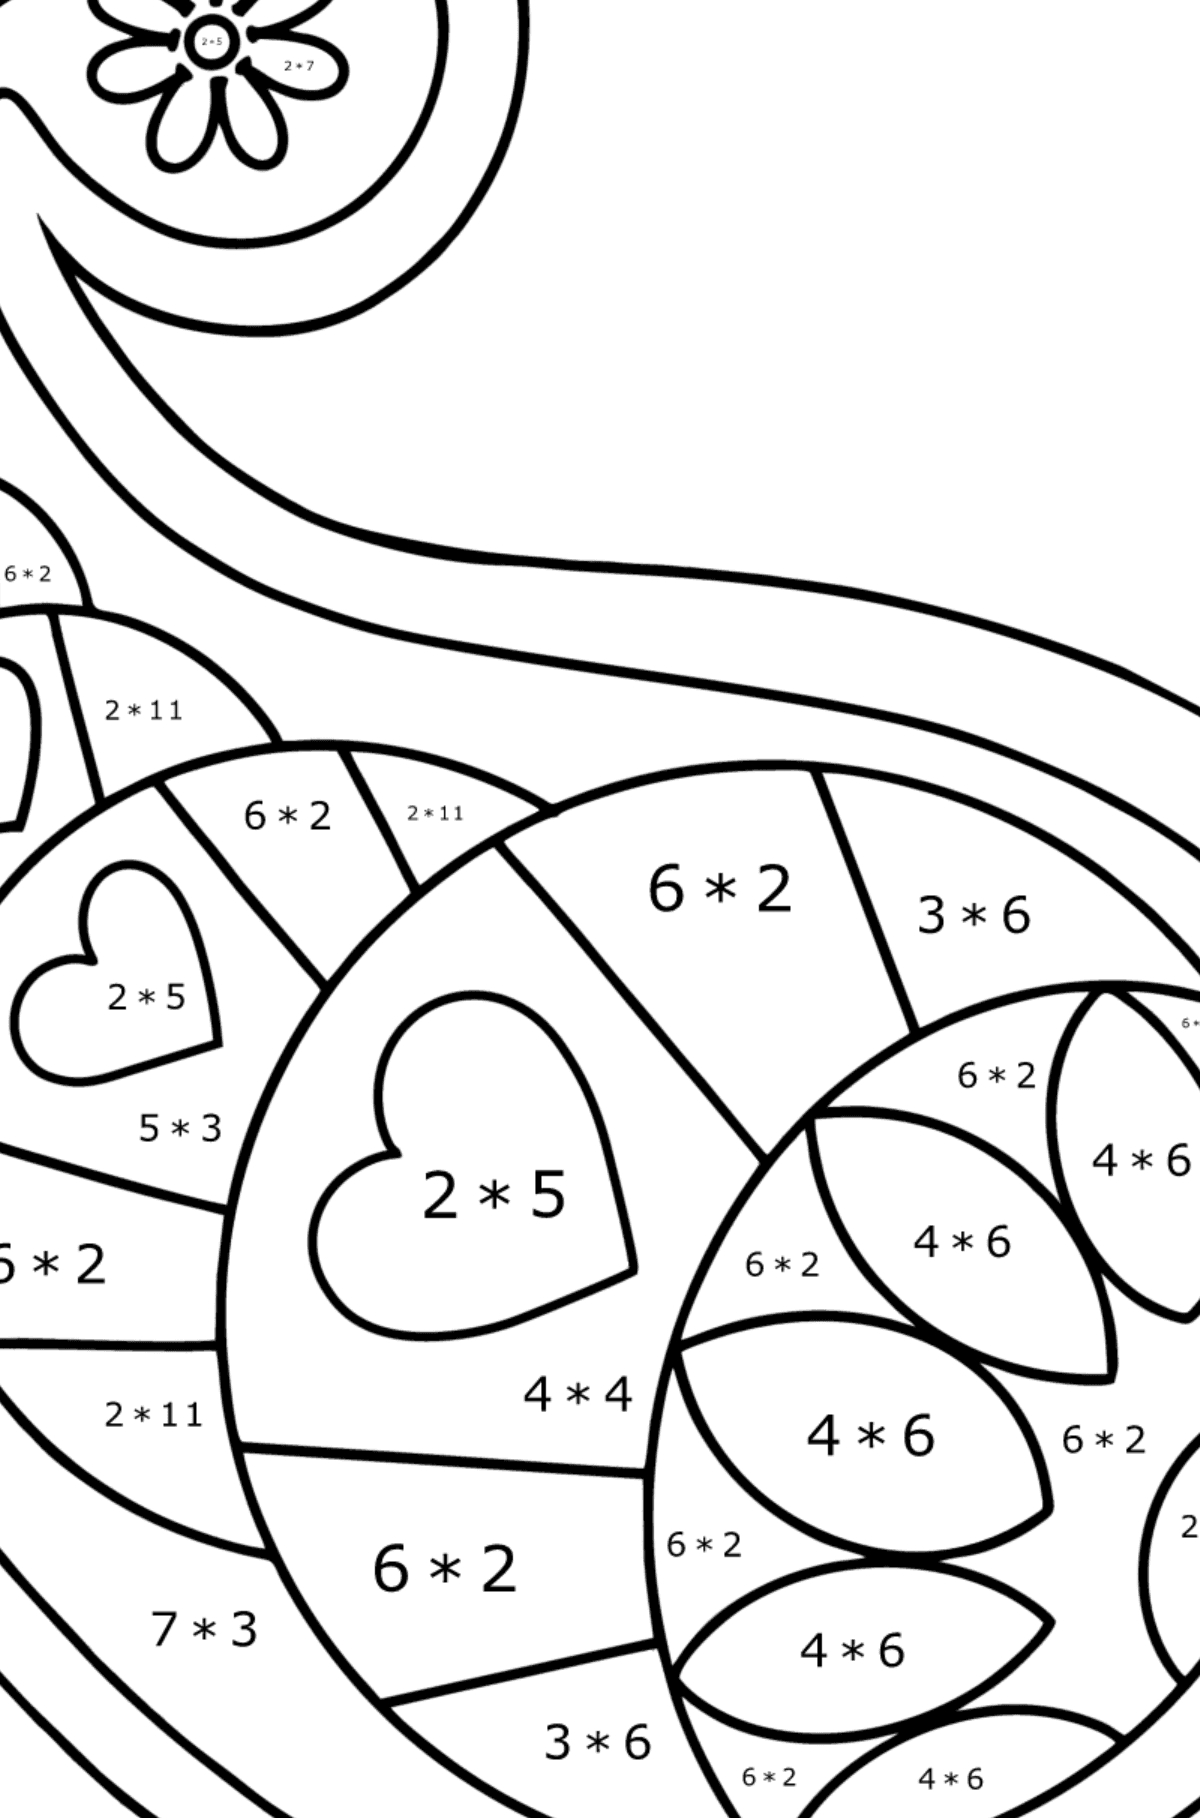 Paisley design coloring page - Math Coloring - Multiplication for Kids